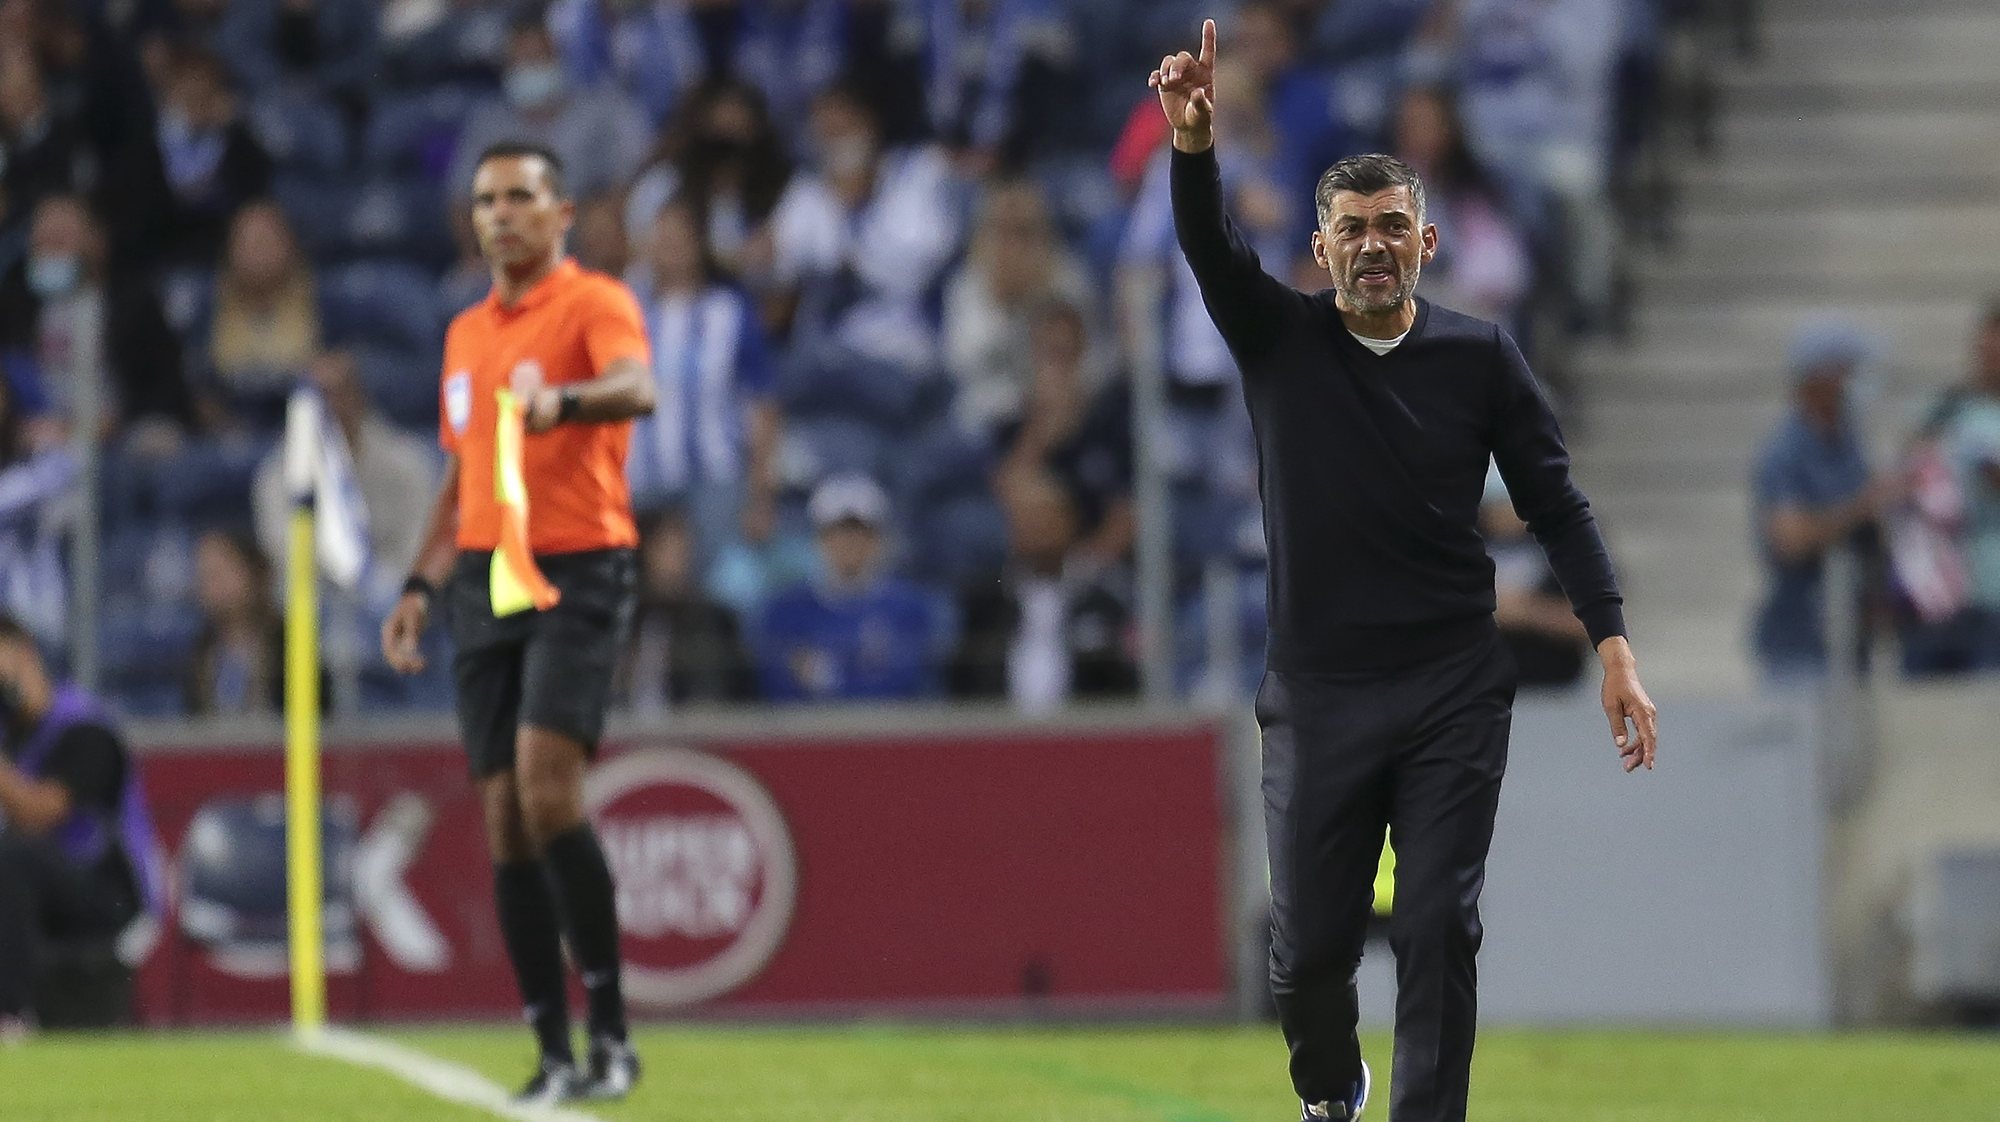 FC Porto head coach Sergio Conceicao reacts during their Portuguese First League soccer match against Moreirense held at Dragao Stadium in Porto, Portugal, 19th September 2021. MANUEL FERNANDO ARAUJO/LUSA